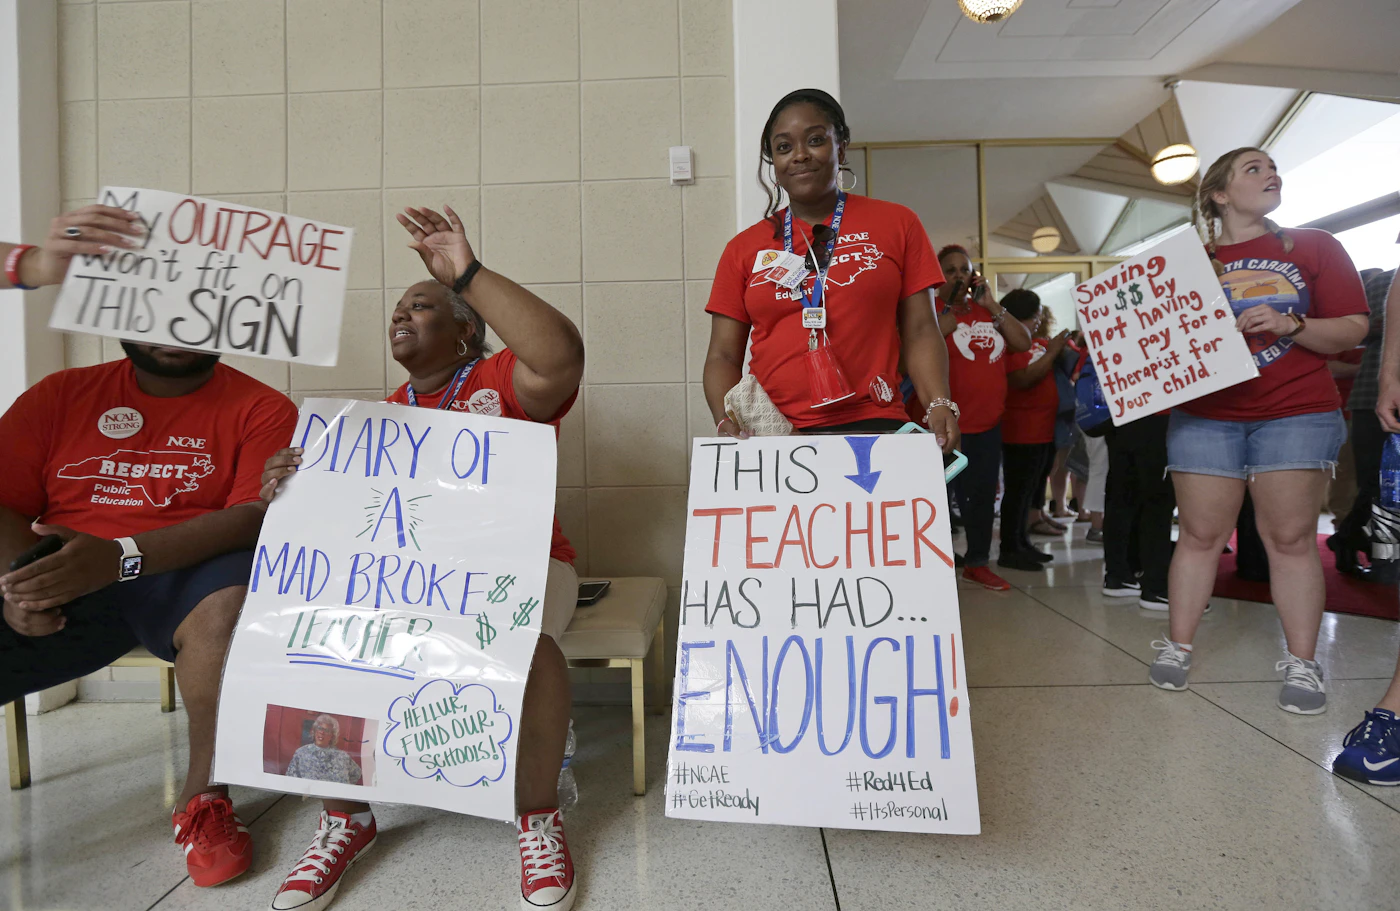 Teachers gather outside the Senate and House chambers during a teachers rally at the General Assembly in Raleigh, N.C., Wednesday, May 16, 2018. Thousands of teachers rallied the state capital seeking a political showdown over wages and funding for public school classrooms. (AP Photo/Gerry Broome)